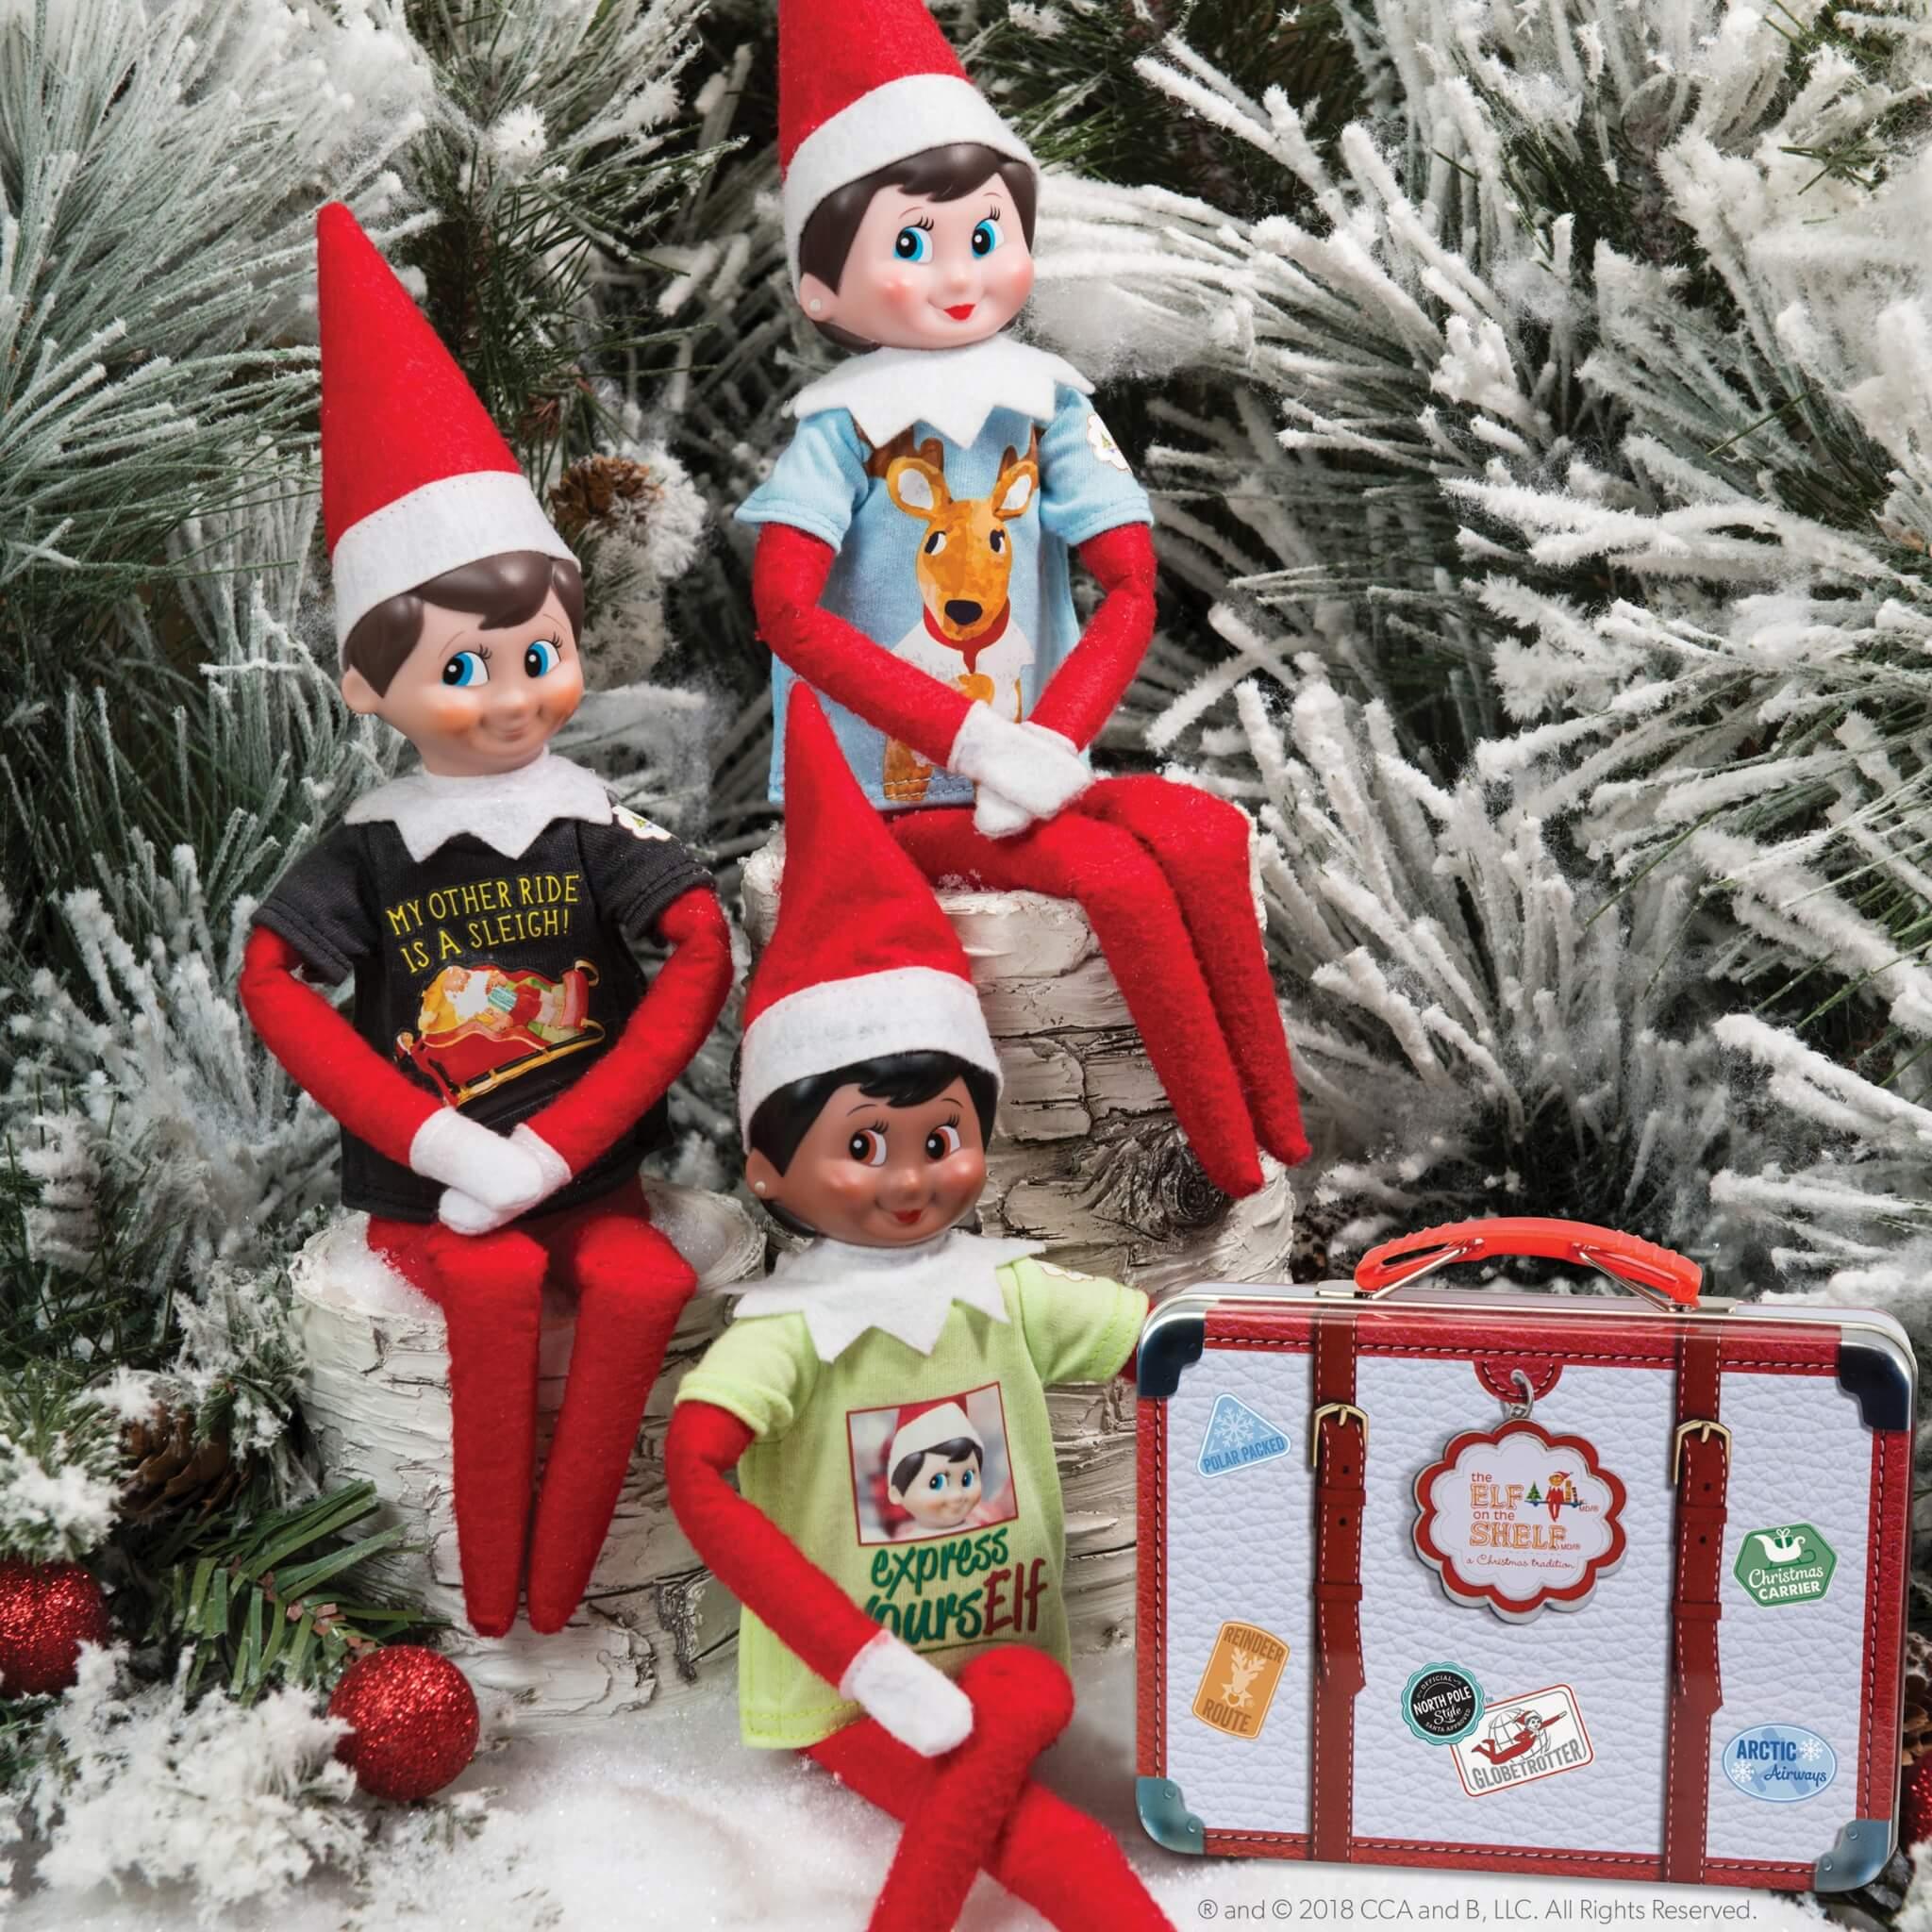 Claus Couture Collection® Tee Multipack: Express YoursELF (Scout Elf Clothes) - The Elf on The Shelf